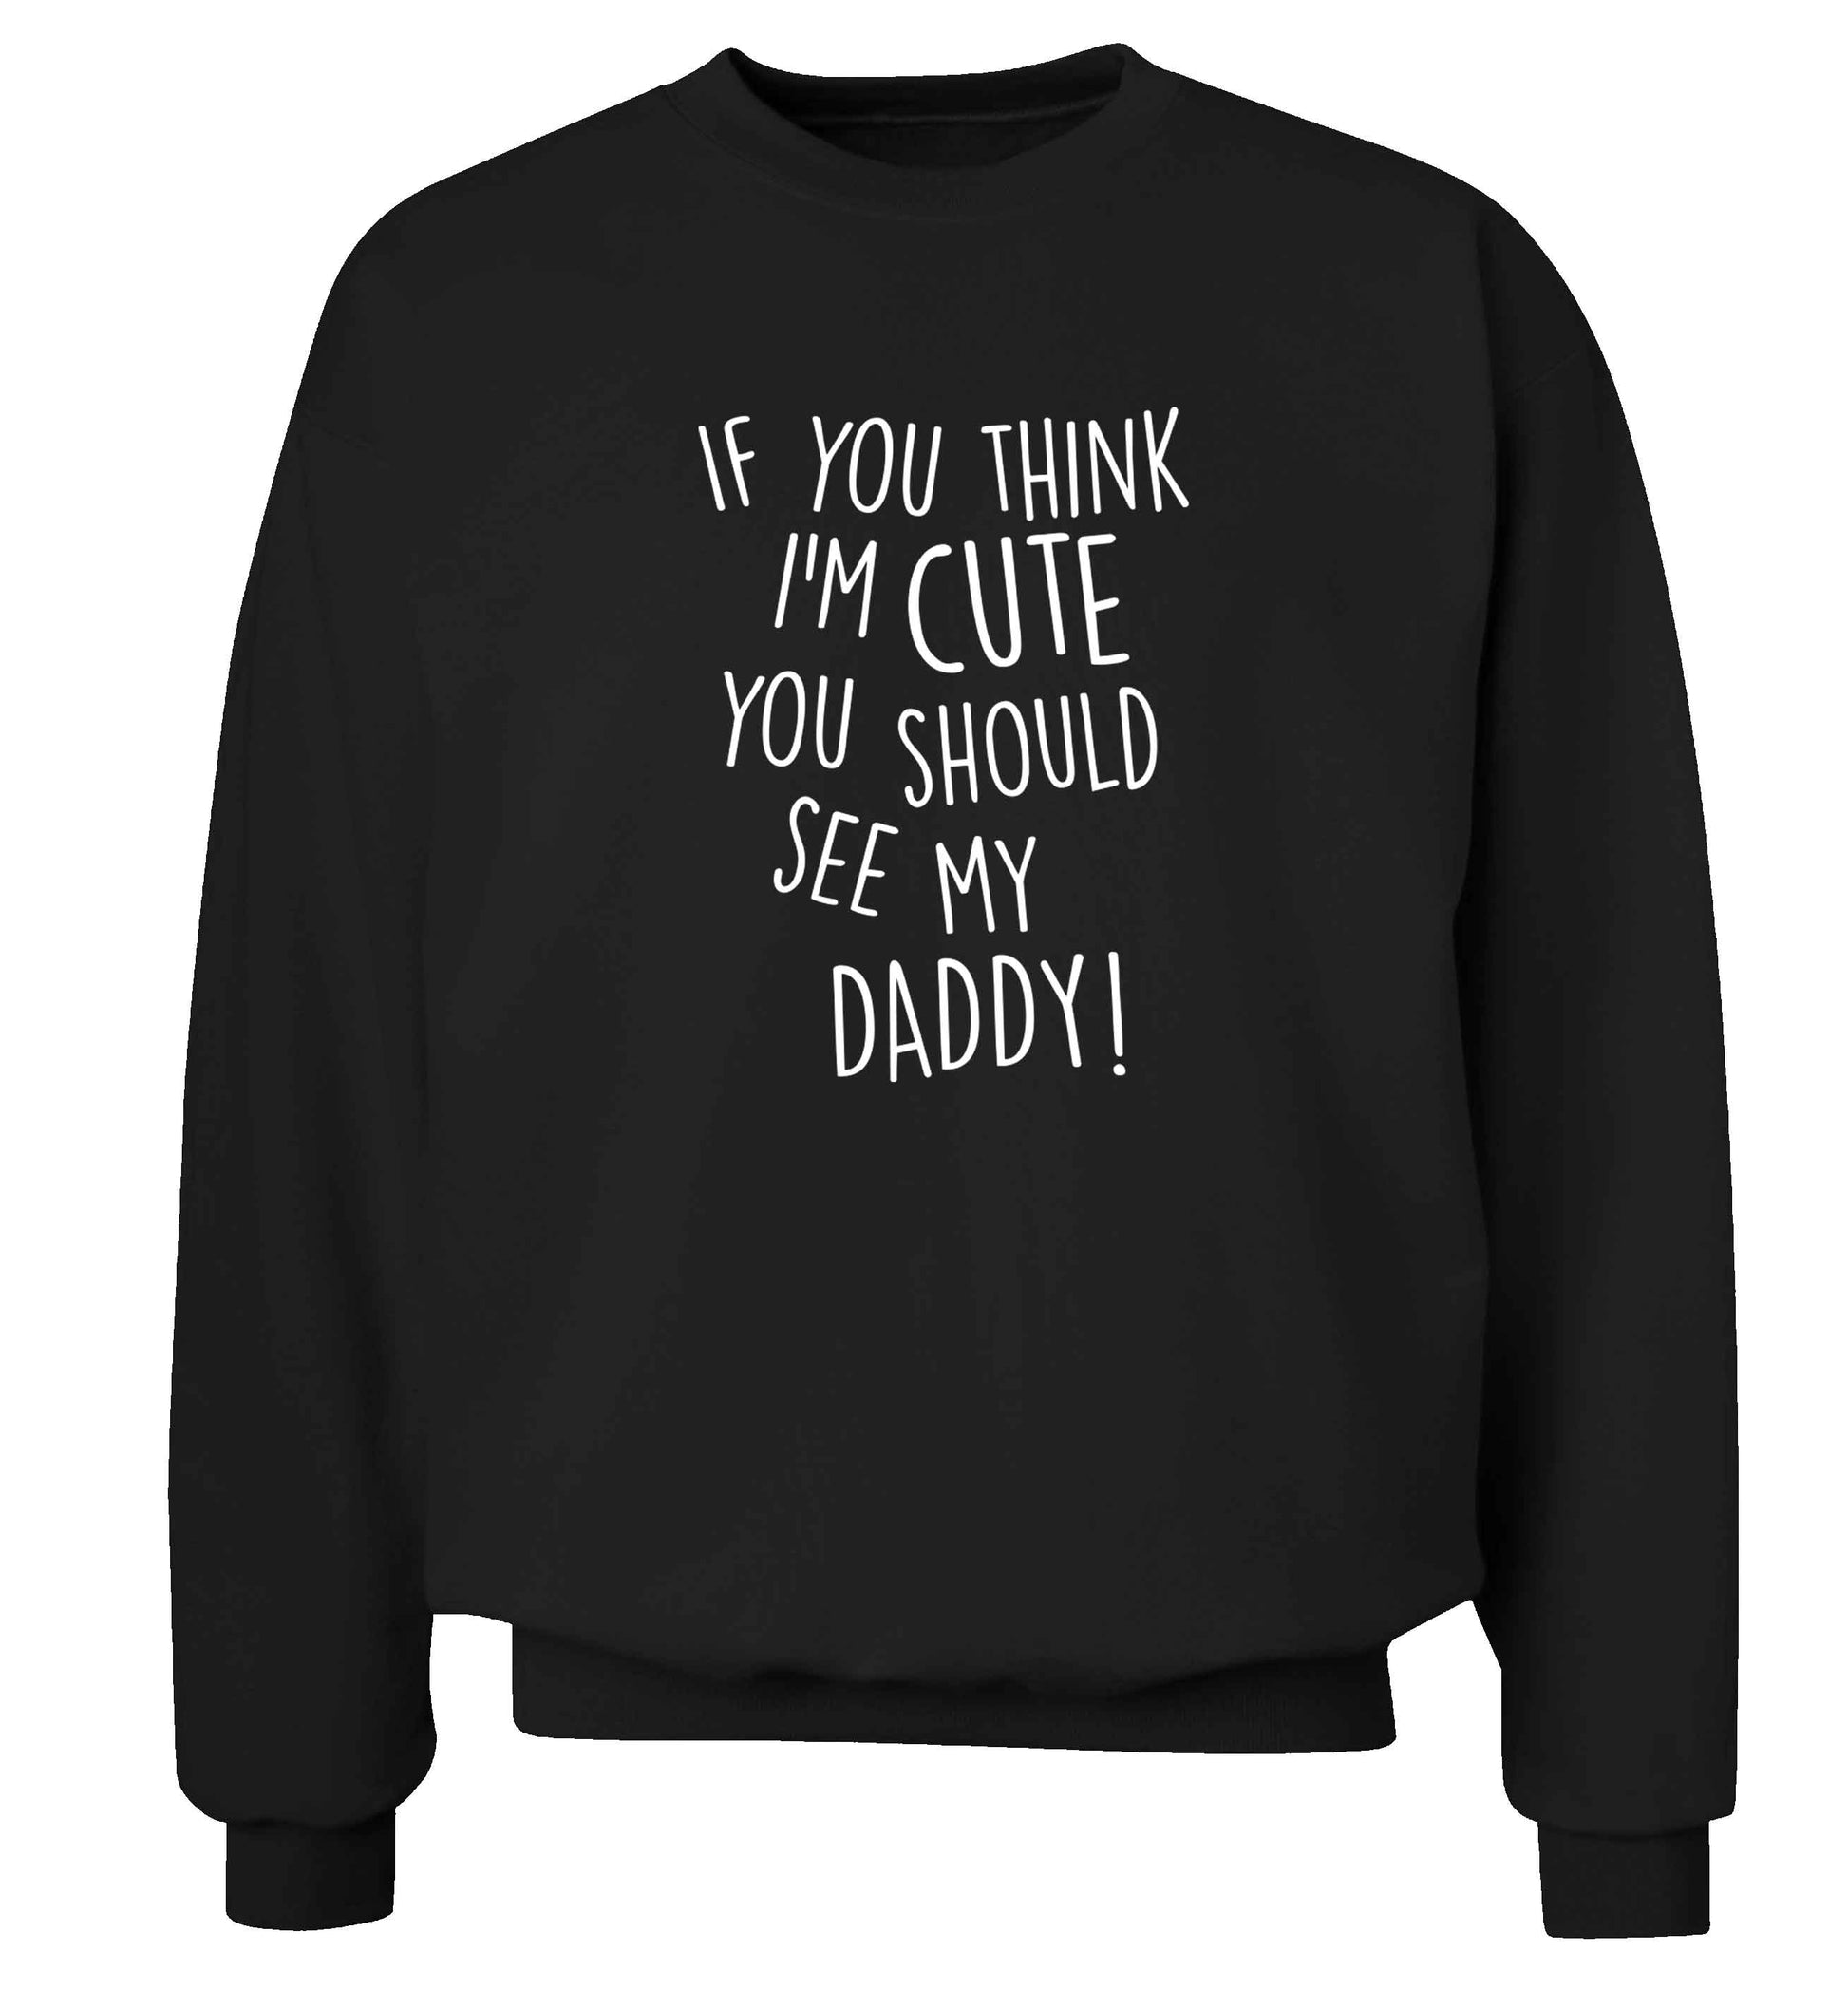 If you think I'm cute you should see my daddy adult's unisex black sweater 2XL